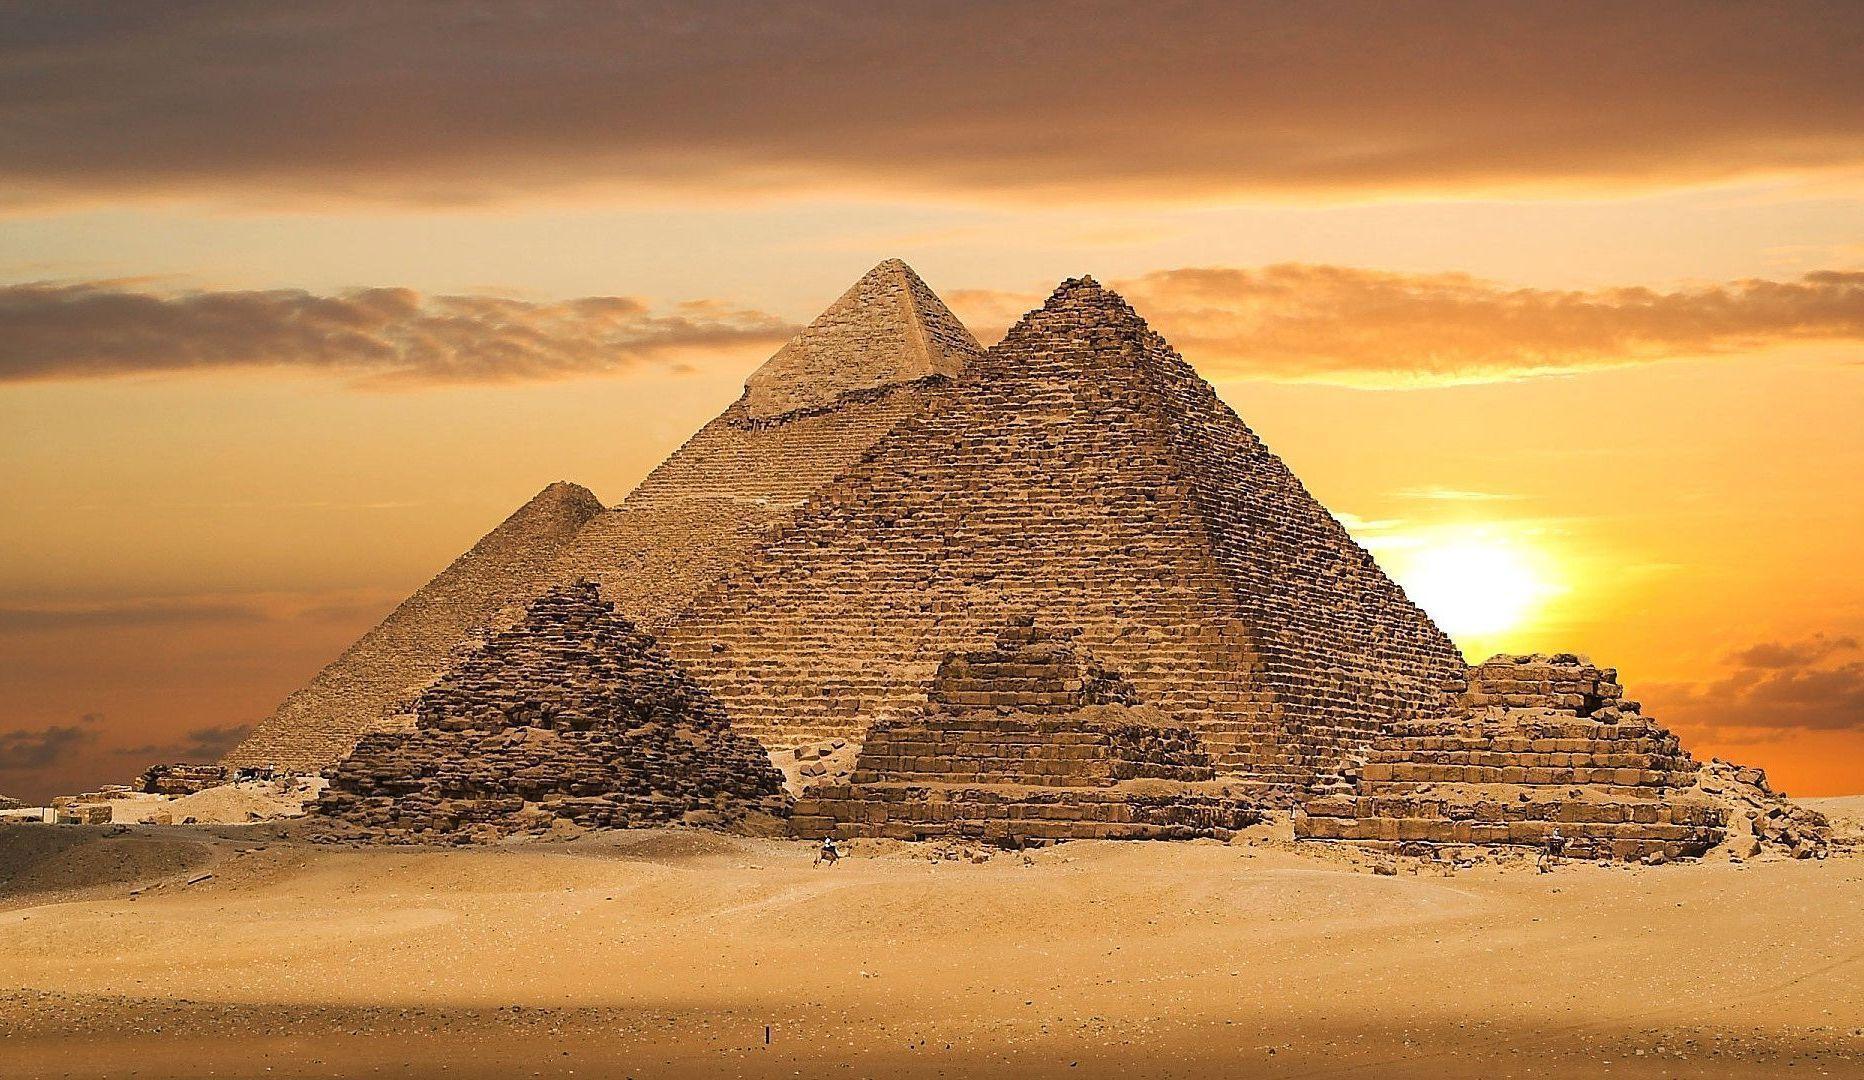 The Pyramids of Giza in Egypt at Sunset Wallpaper and